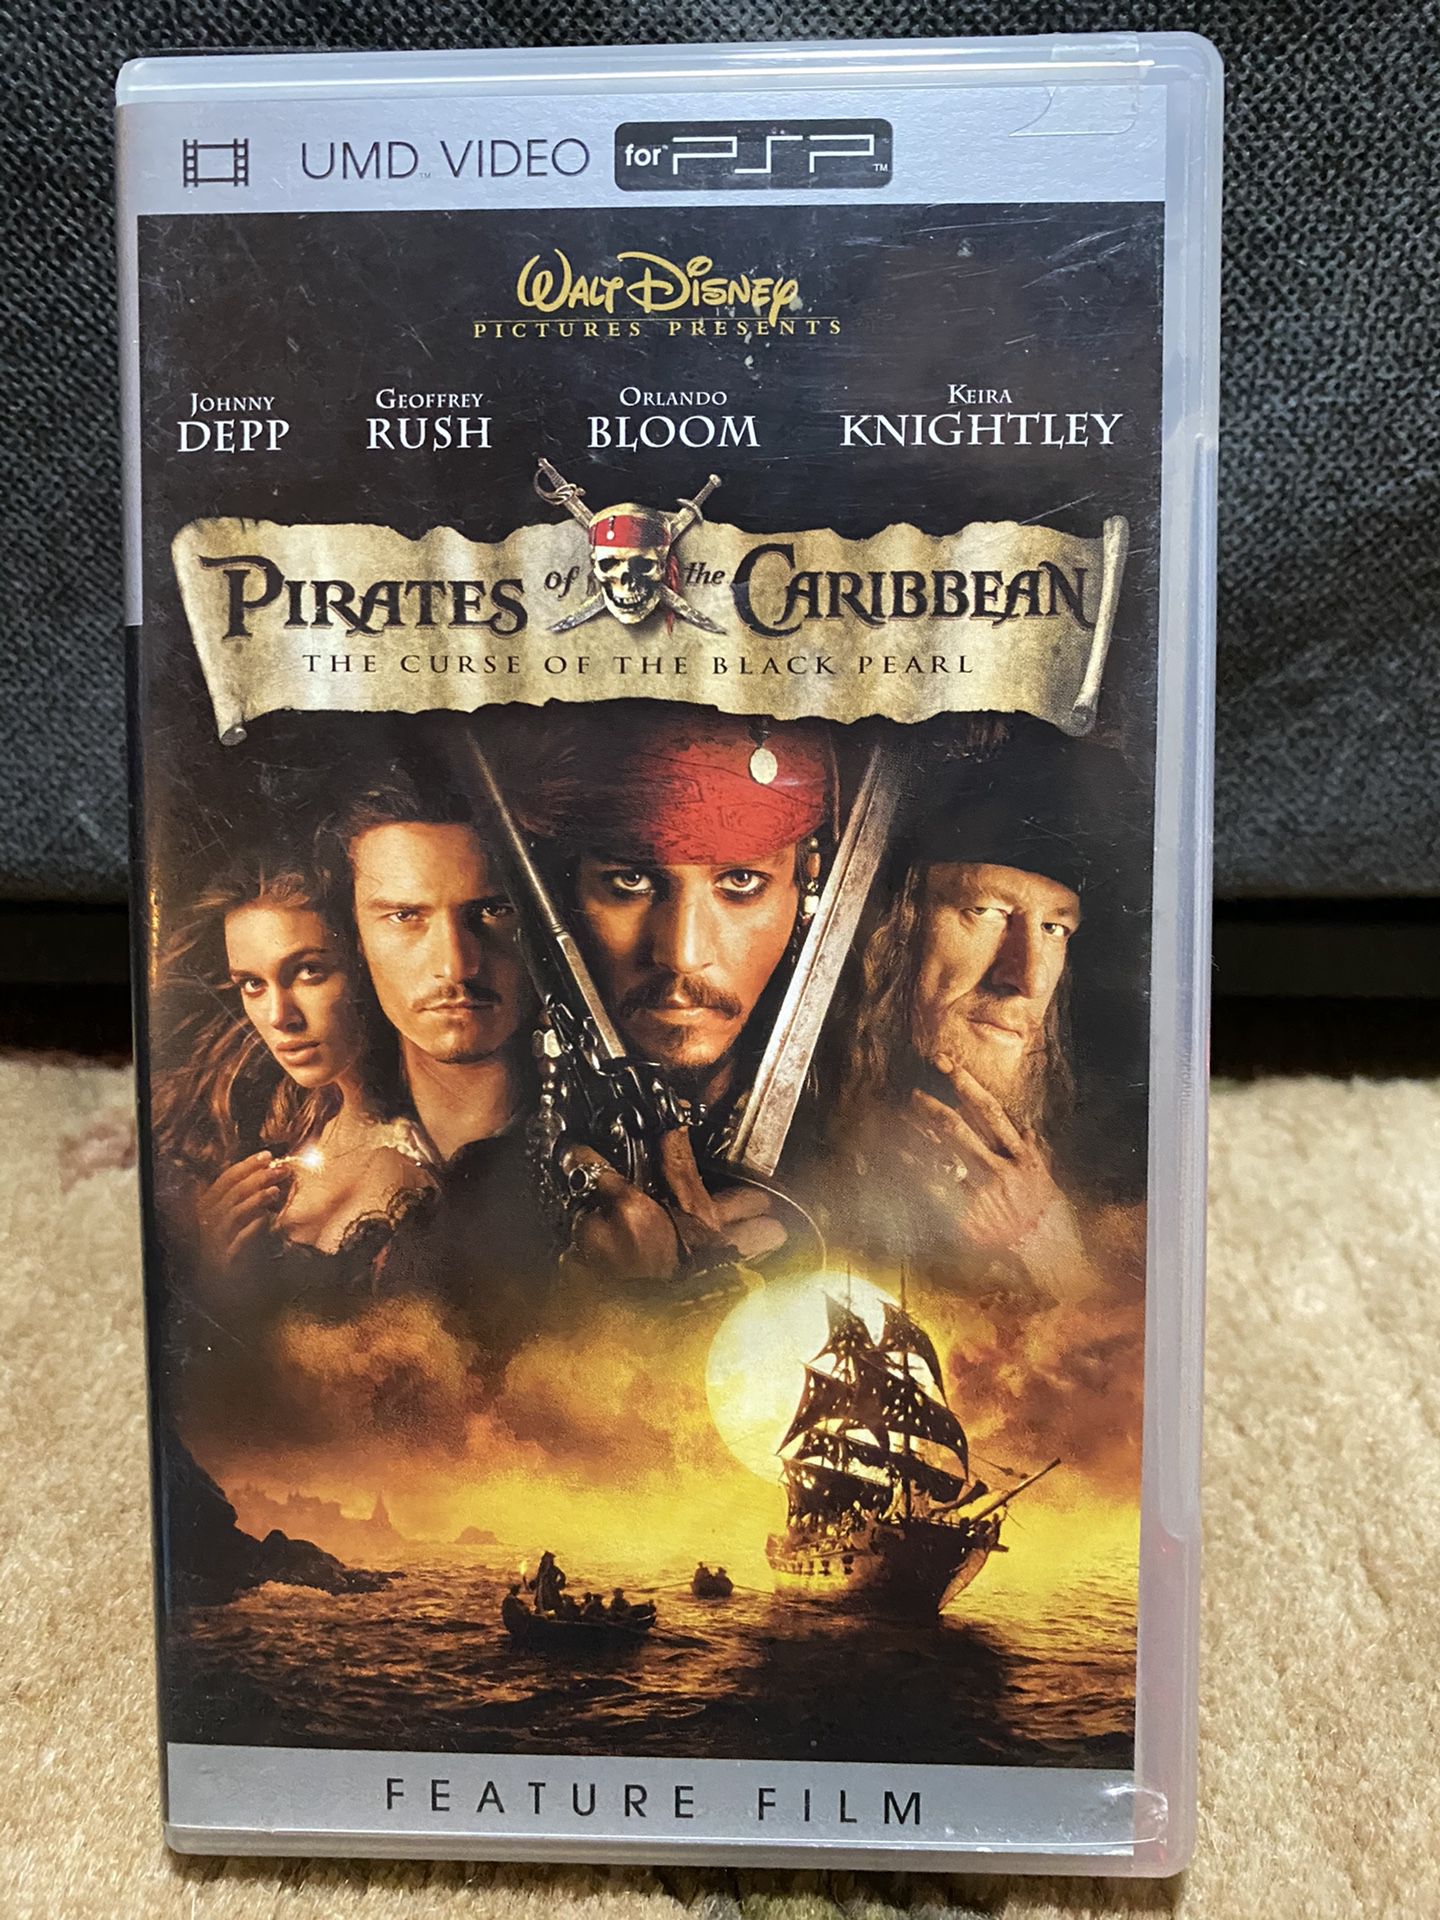 PIRATES OF THE CARIBBEAN: The Curse Of The Black Pearl